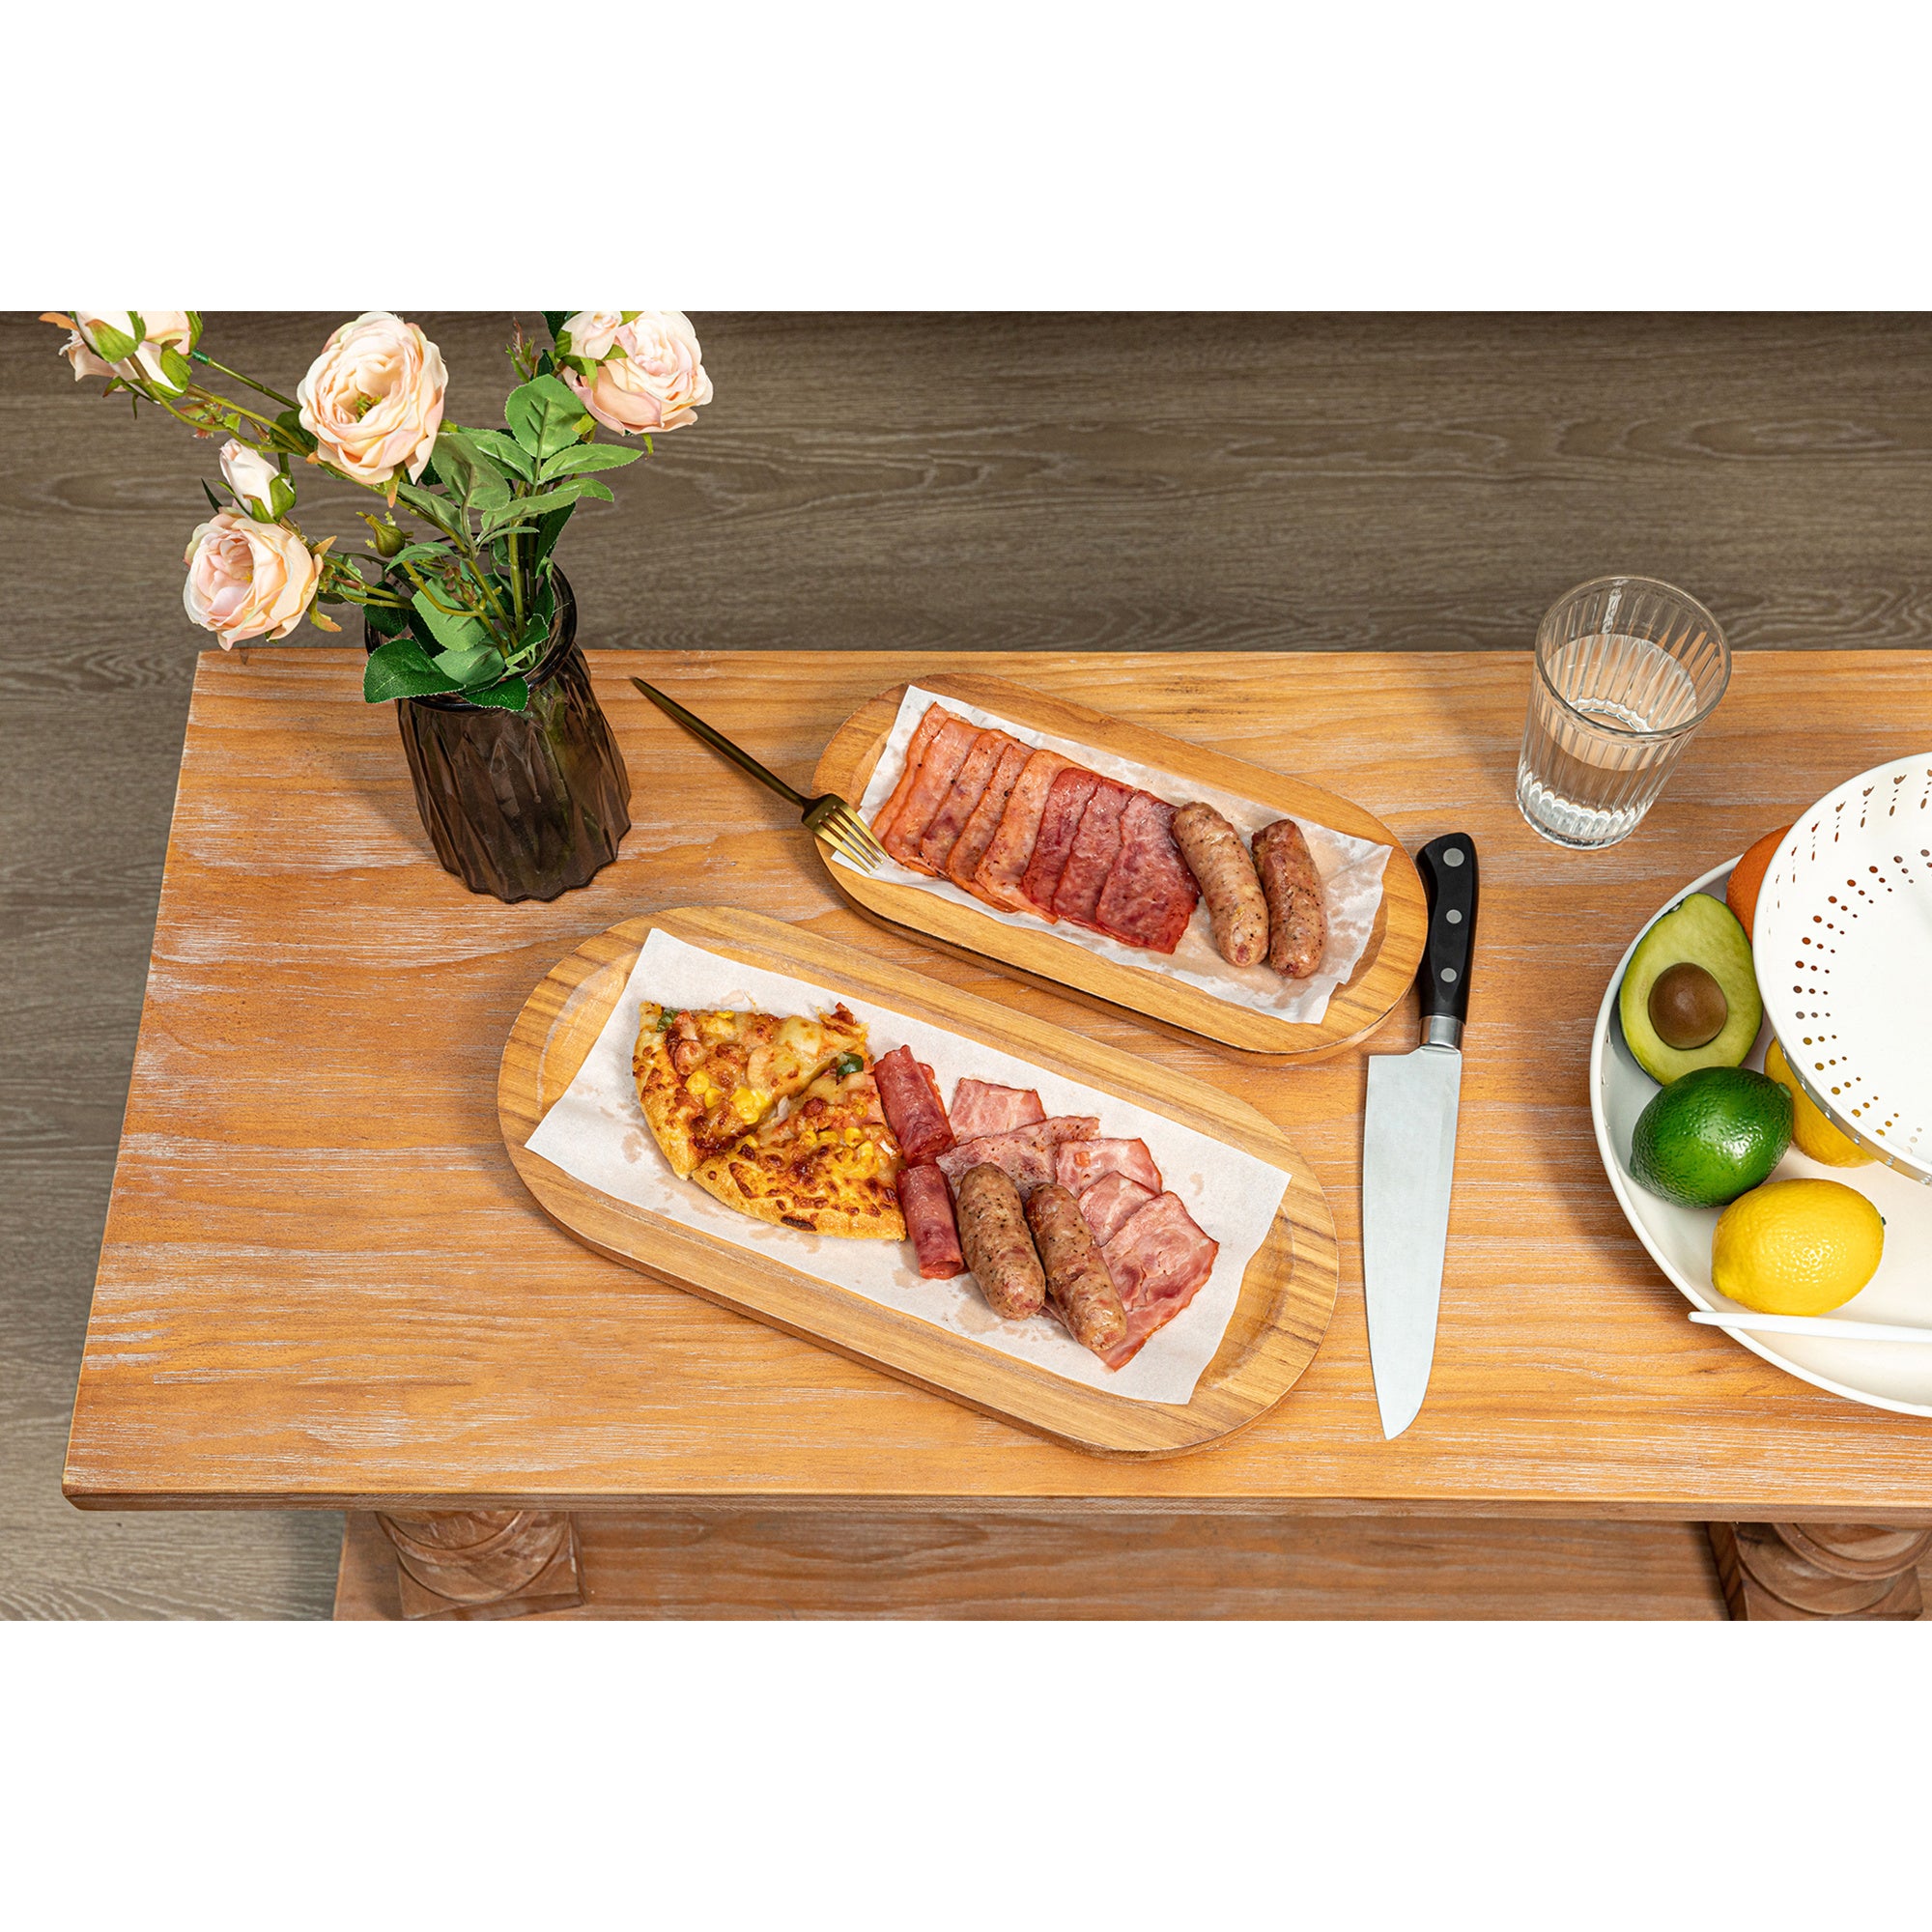 Oval Wooden Serving Trays Set of 2 - life of kuhl @HOME